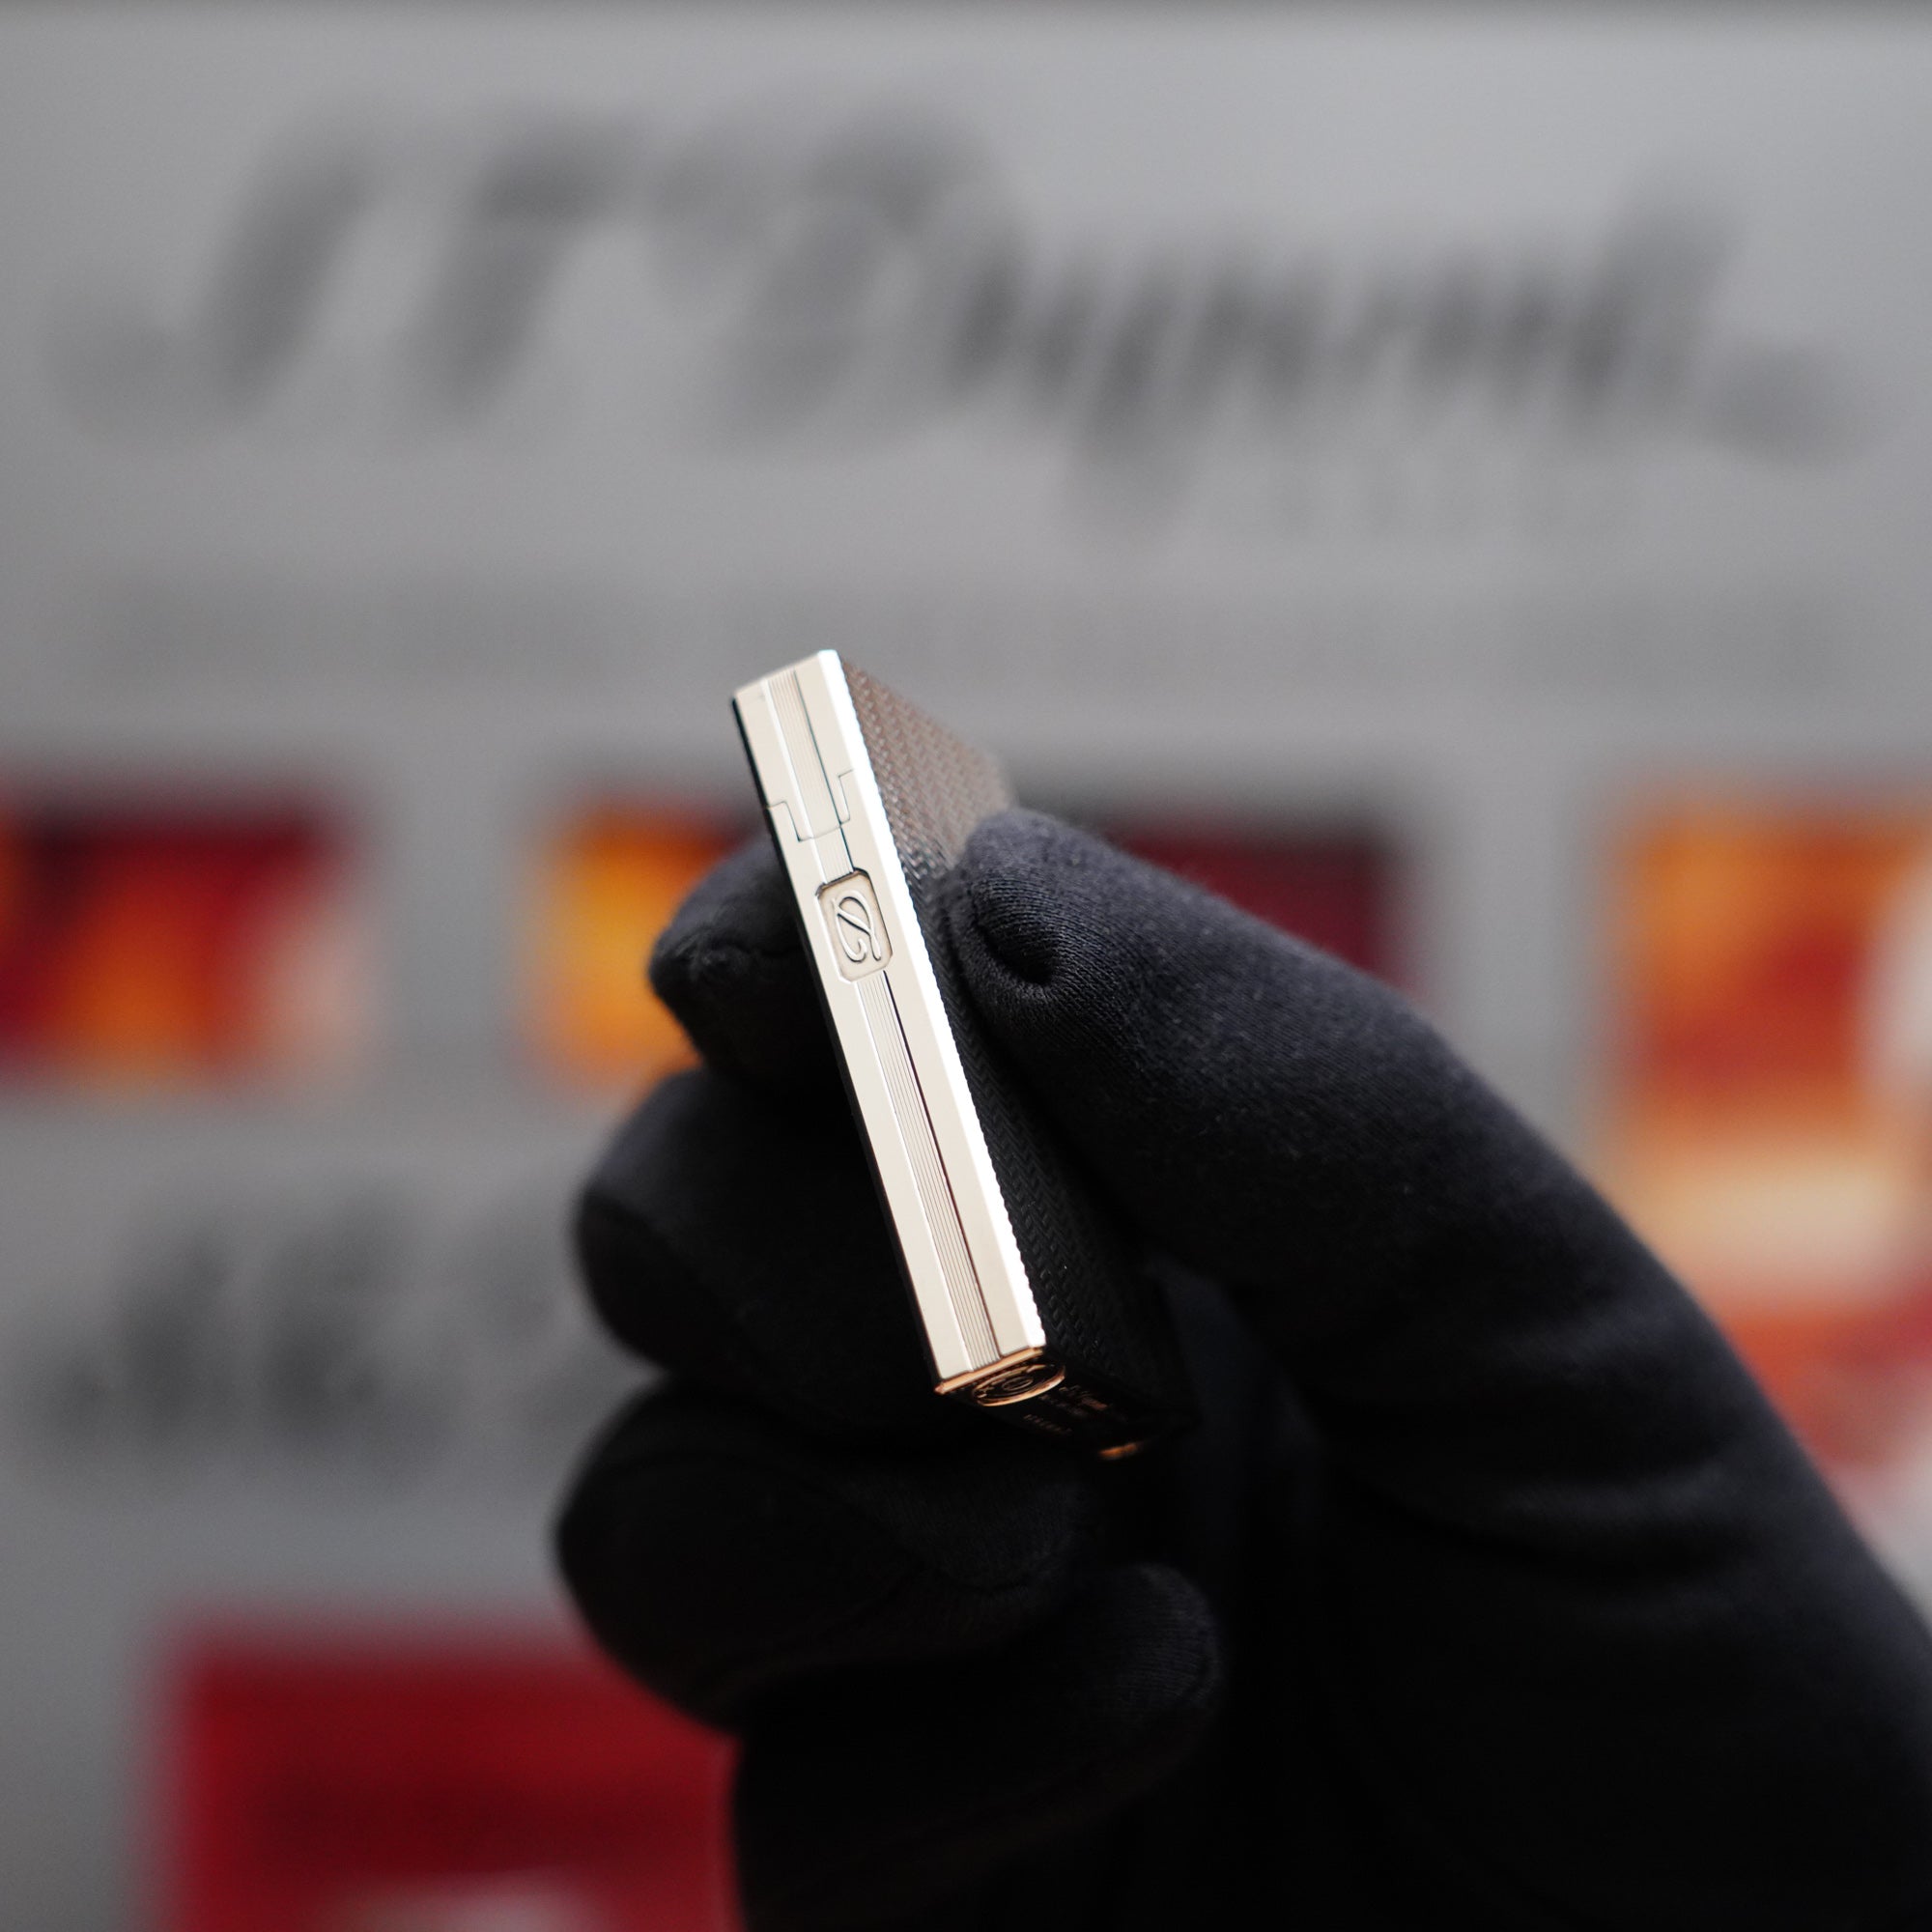 A Vintage 1980 S.T. Dupont Ligne D Heavy Silver Plated Lighter Fine Wave Type Lighter in a hand held in front of a sign.